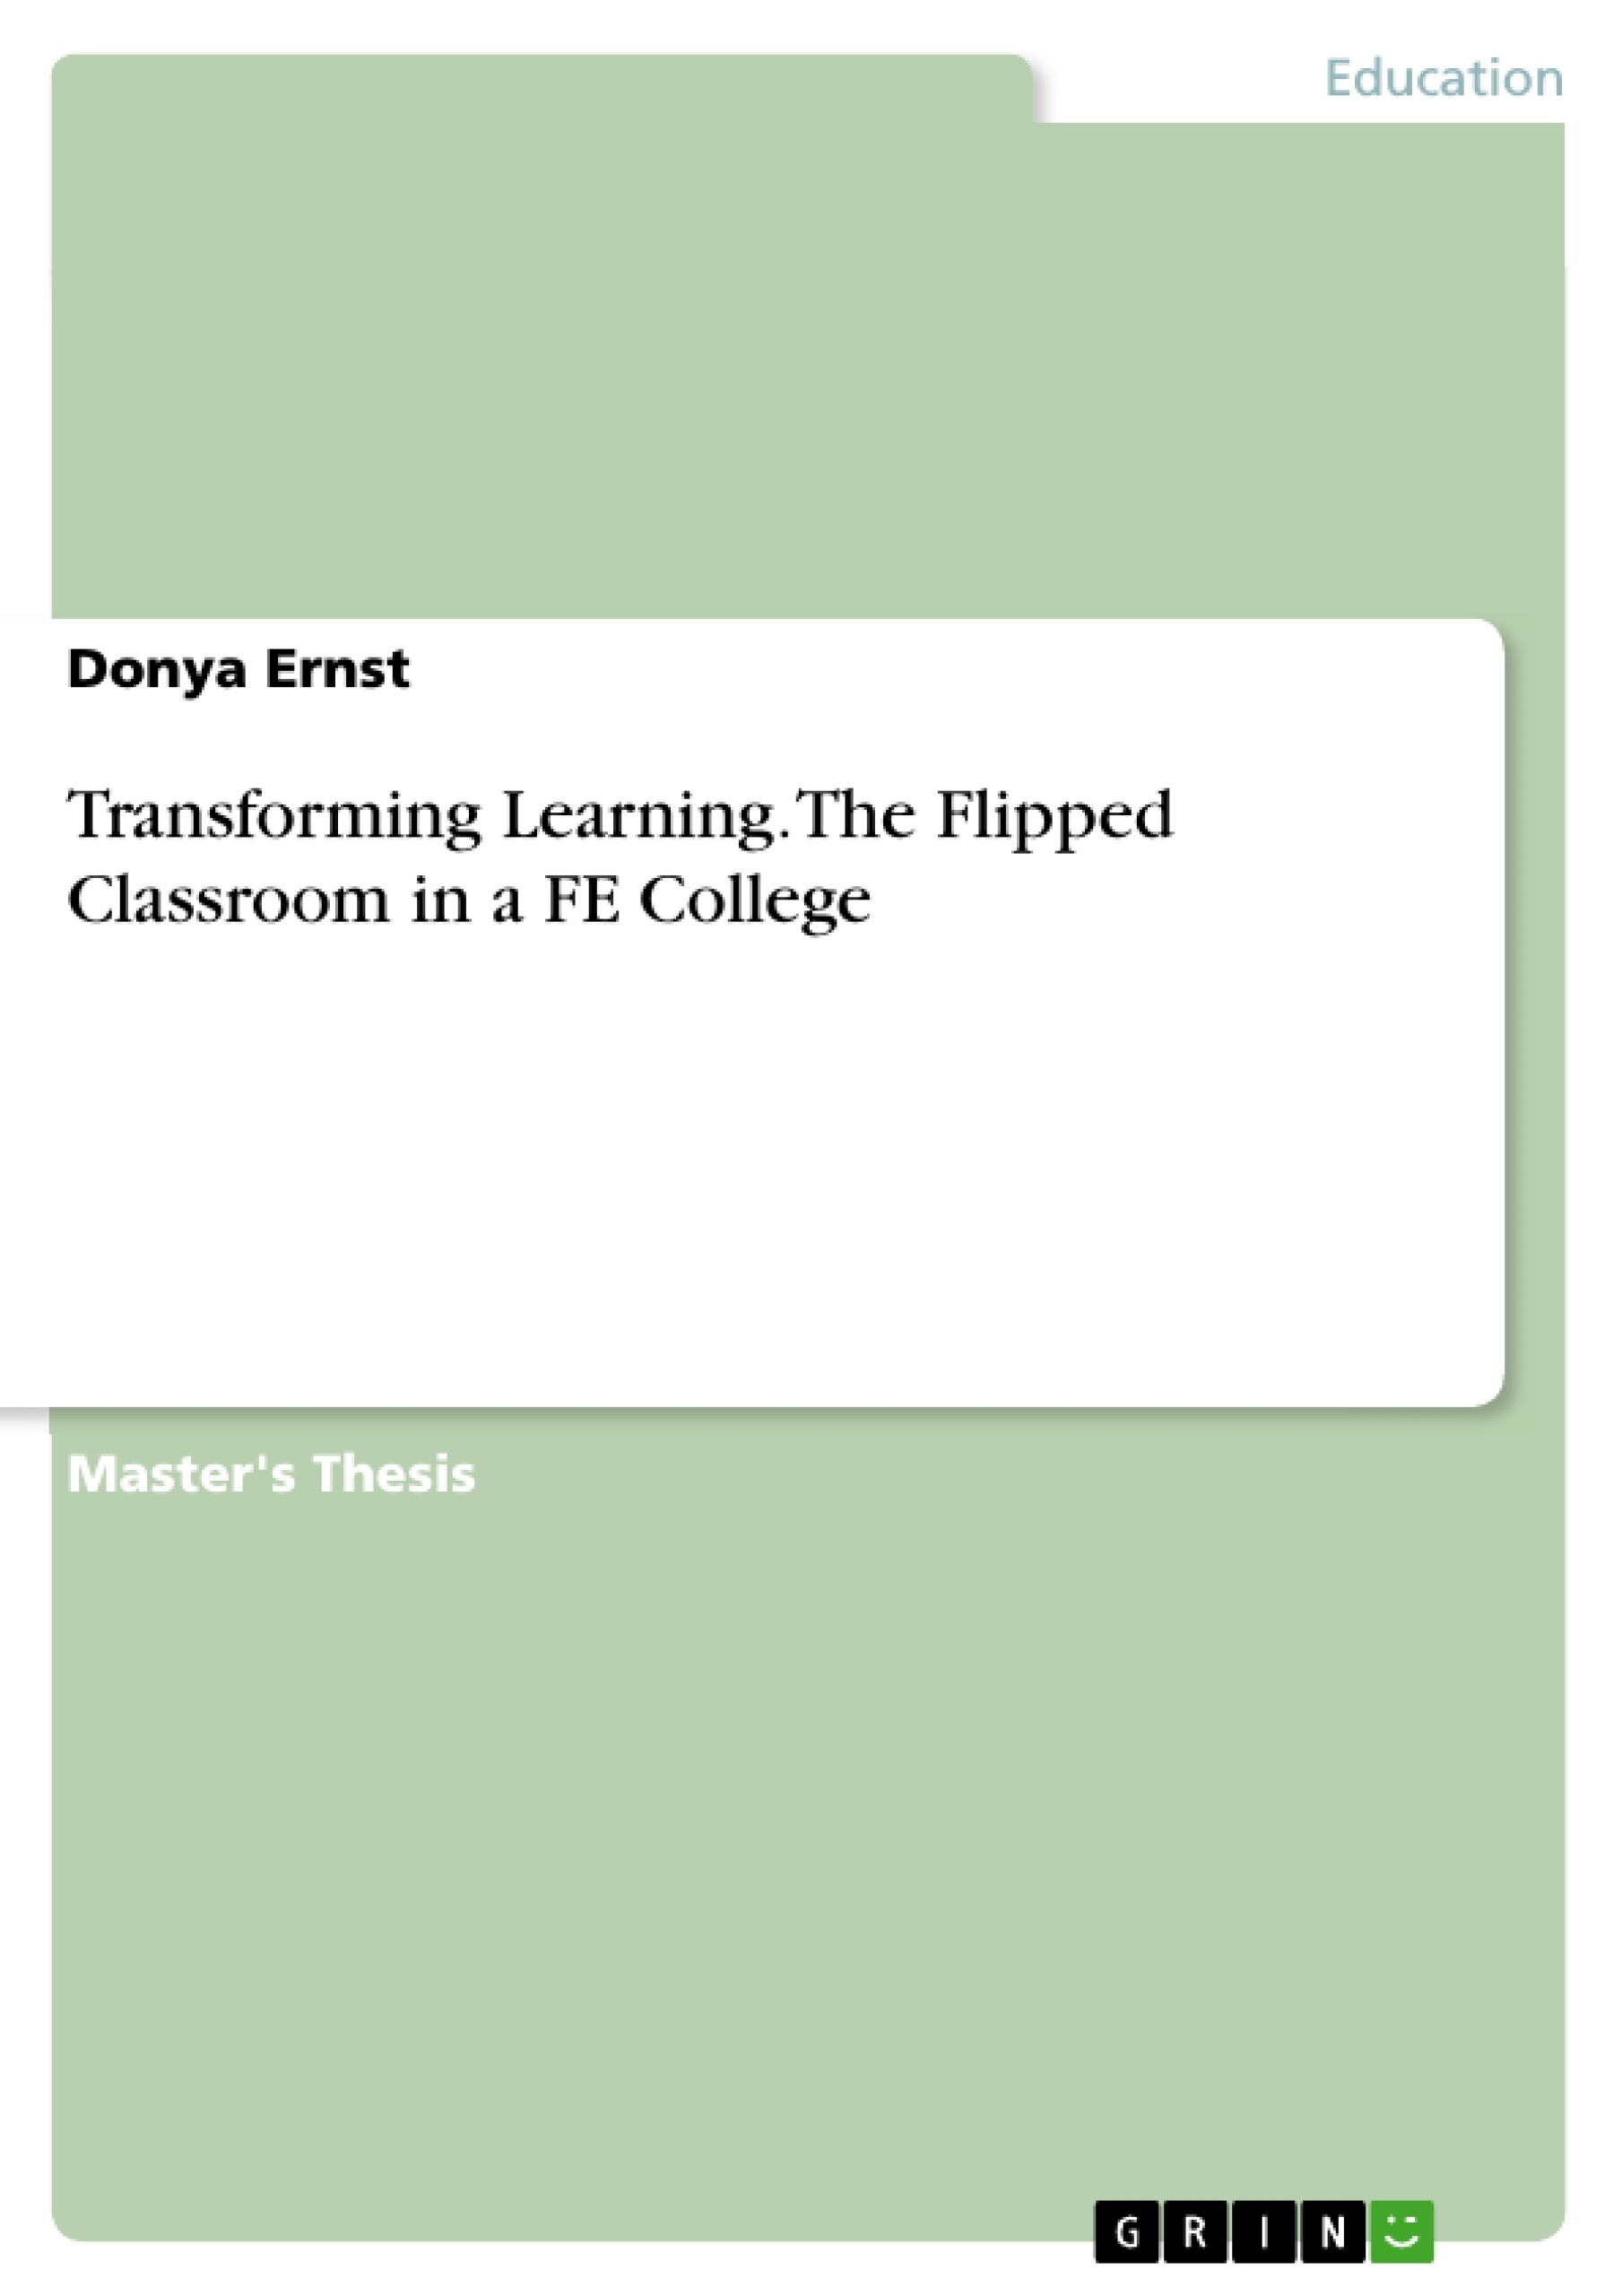 The　a　Flipped　FE　Classroom　in　College　GRIN　Transforming　Learning.